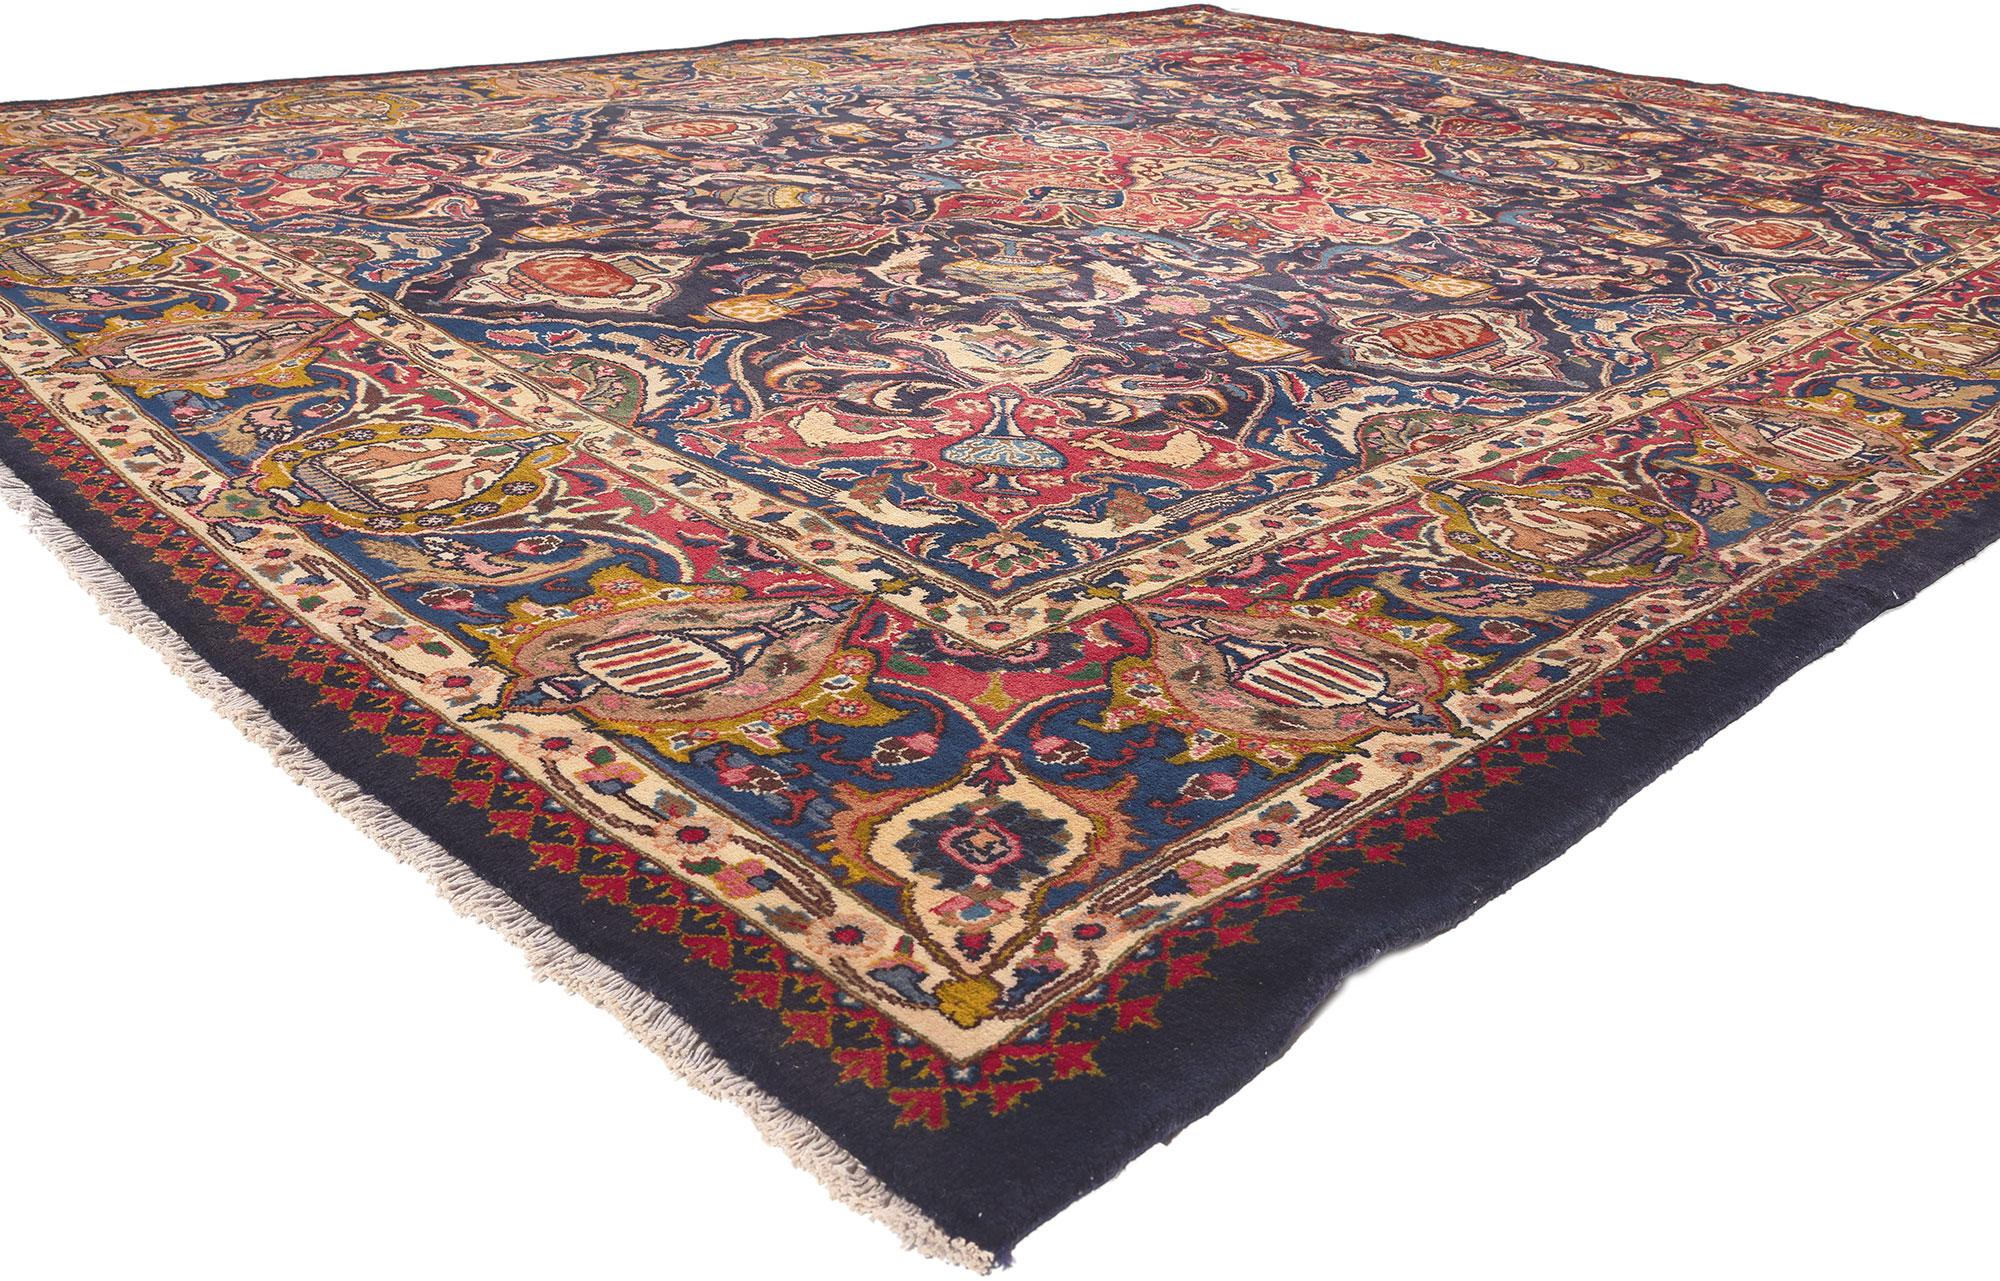 75520 Vintage Persian Mashhad Rug, 09'07 x 12'10.
Art Nouveau meets worldly treasures in this hand knotted wool vintage Persian Mashhad rug. The Zir Khaki design and sophisticated color palette woven into this piece work together creating a happy